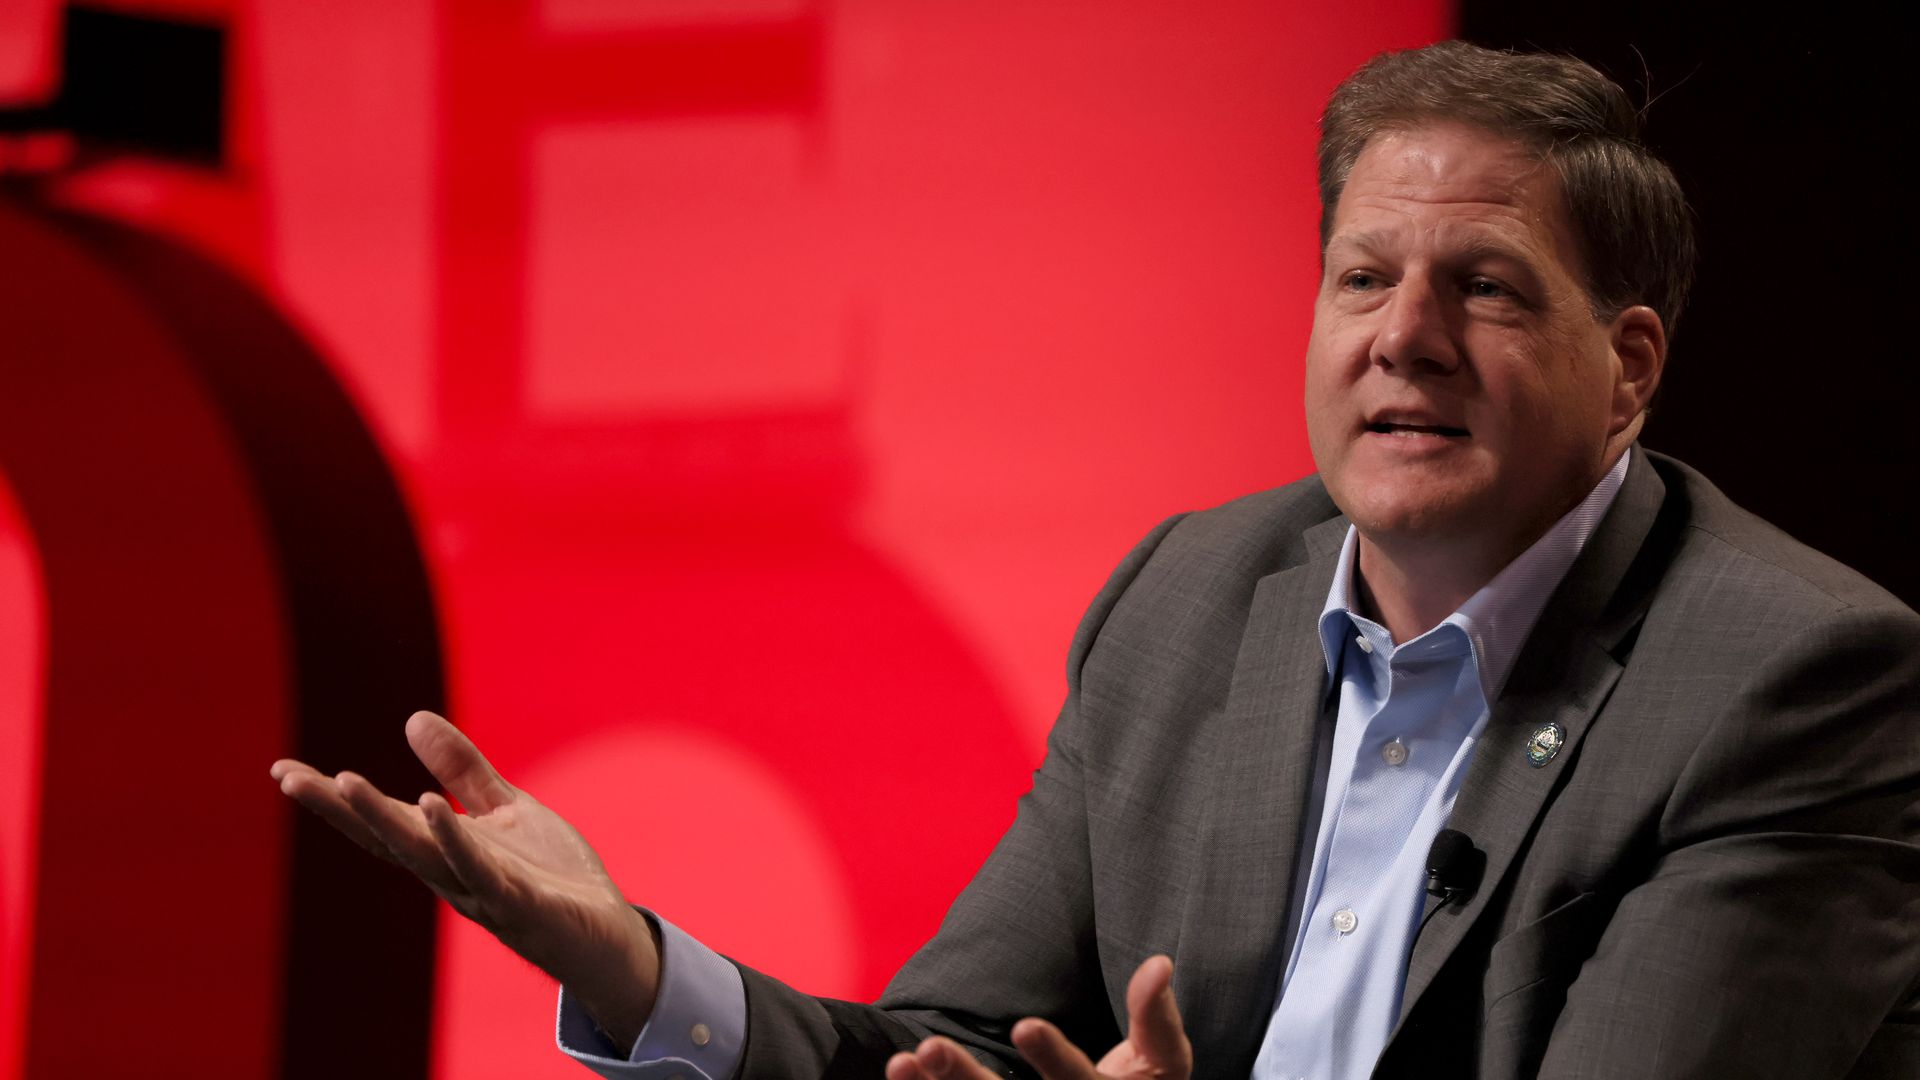  Chris Sununu speaks onstage at the 2023 TIME100 Summit at Jazz at Lincoln Center on April 25, 2023 in New York City.